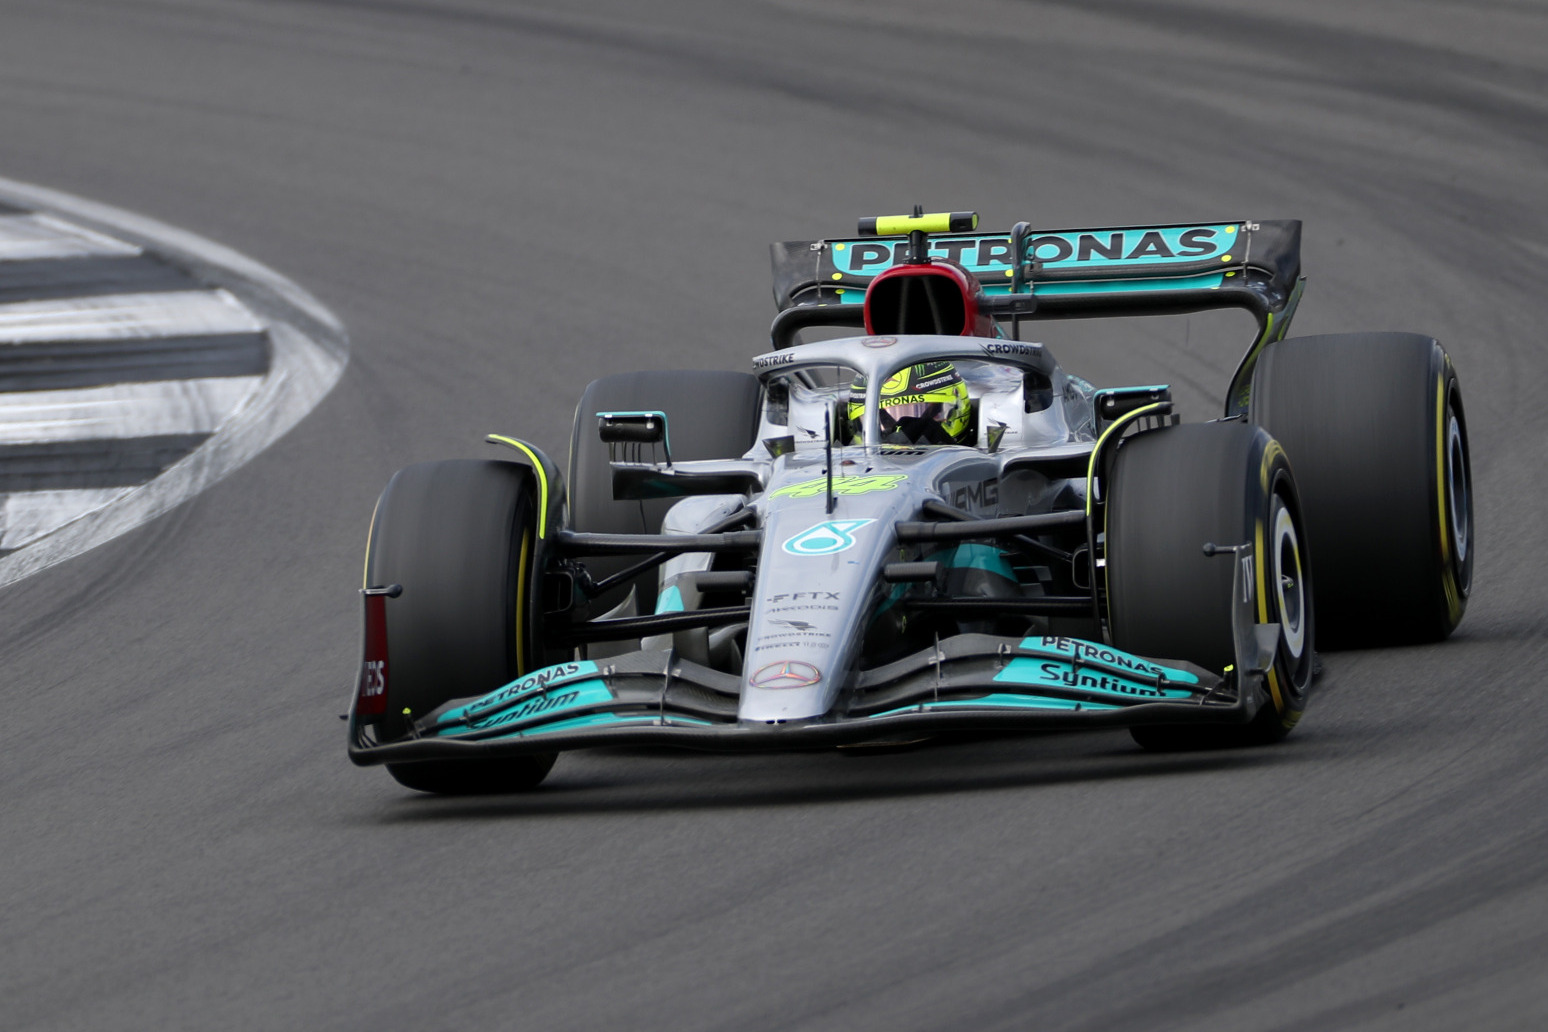 Lewis Hamilton well off the pace in practice at the French Grand Prix 